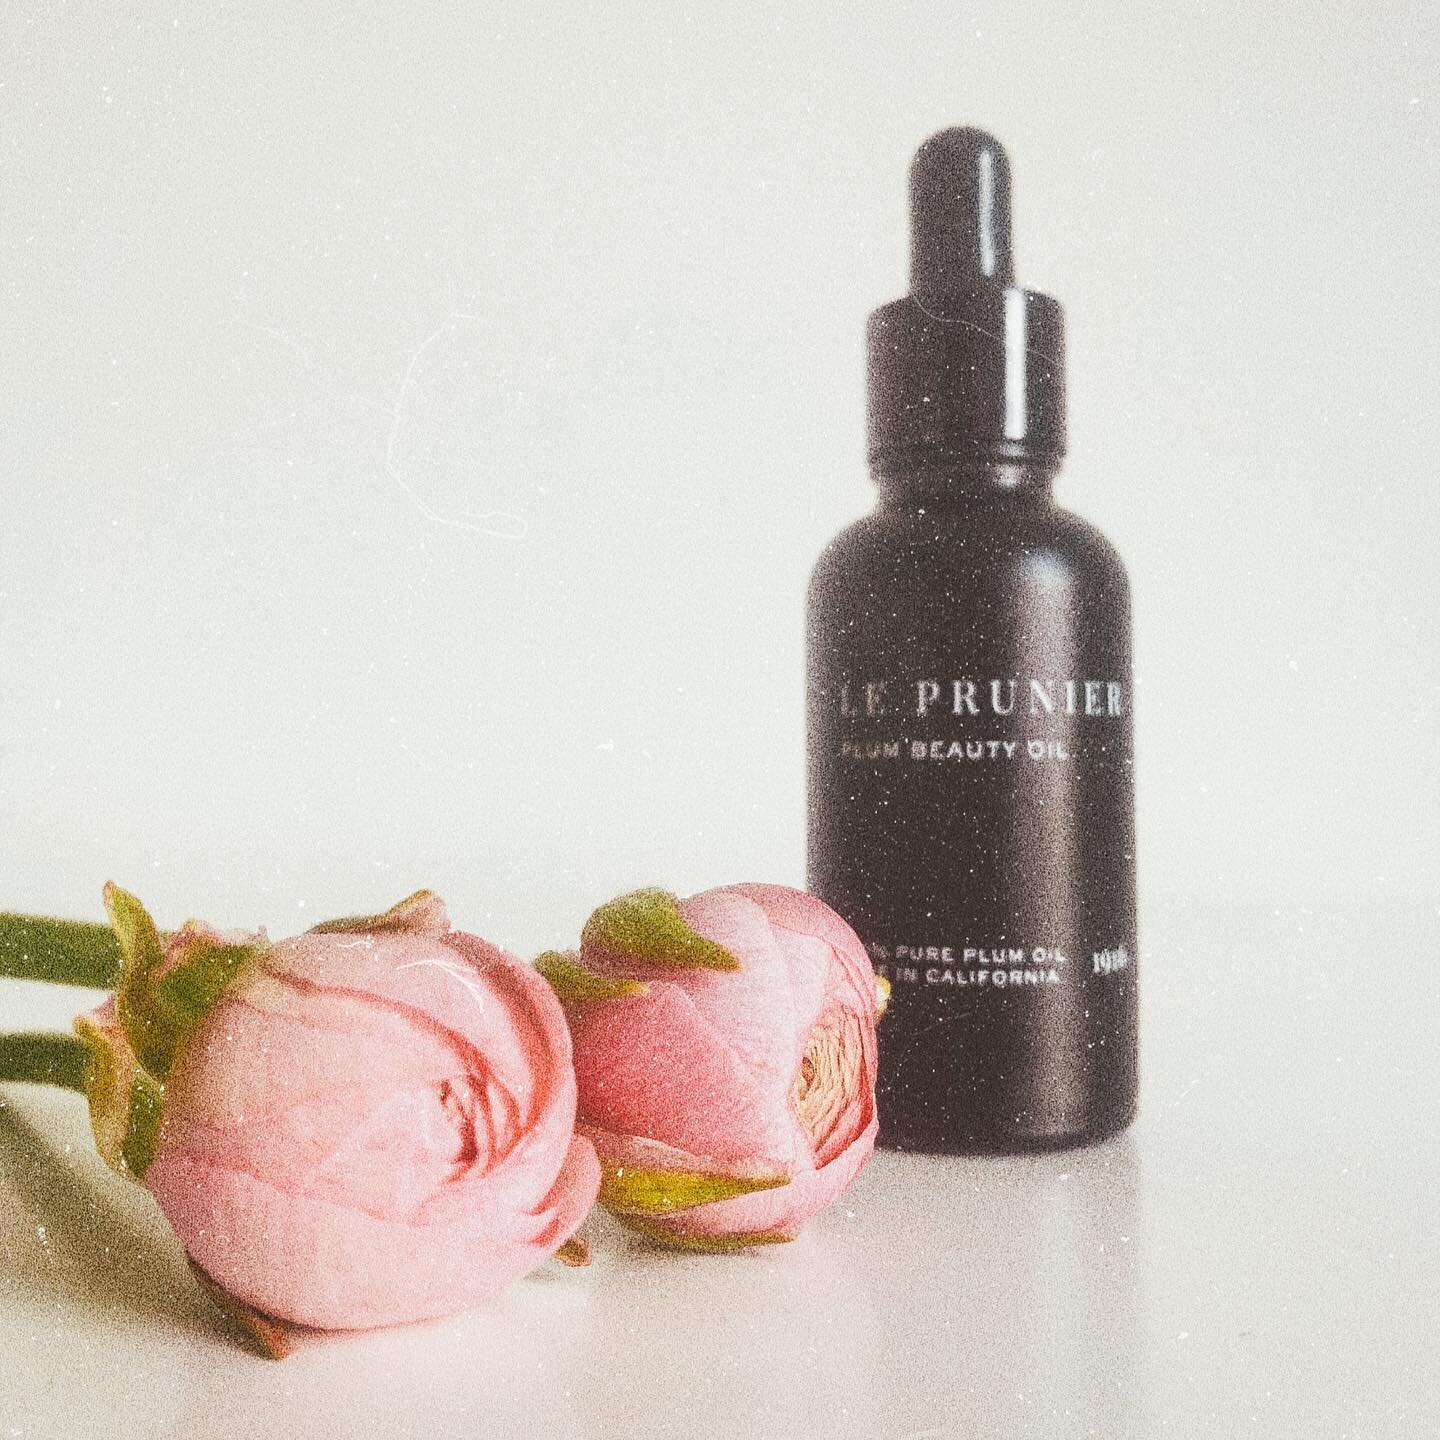 The only face oil 🌸 
Le Prunier deserves every bit of love it gets. Always sold out (got two bottles in the post arriving soon) .. when in stock, hurry, you can thank me later.
Only one I ingredient, organic plum oil - full of omegas, antioxidants a